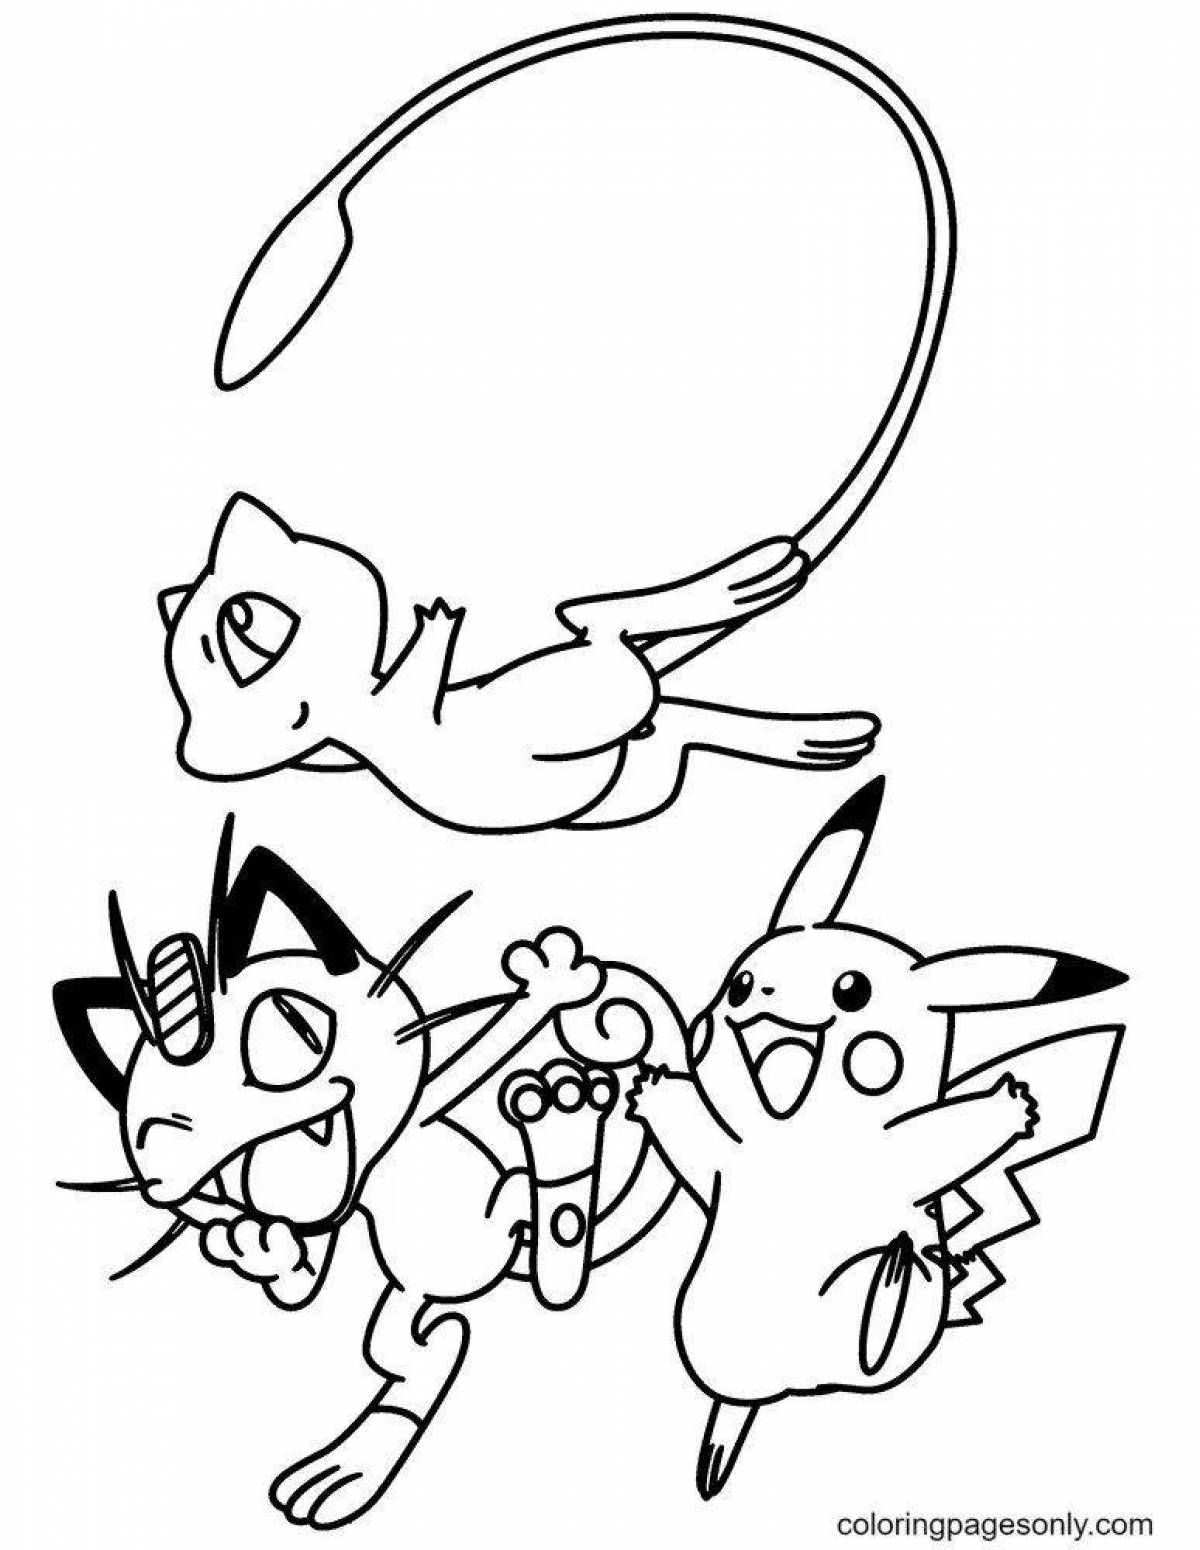 Blessed Meowth coloring page